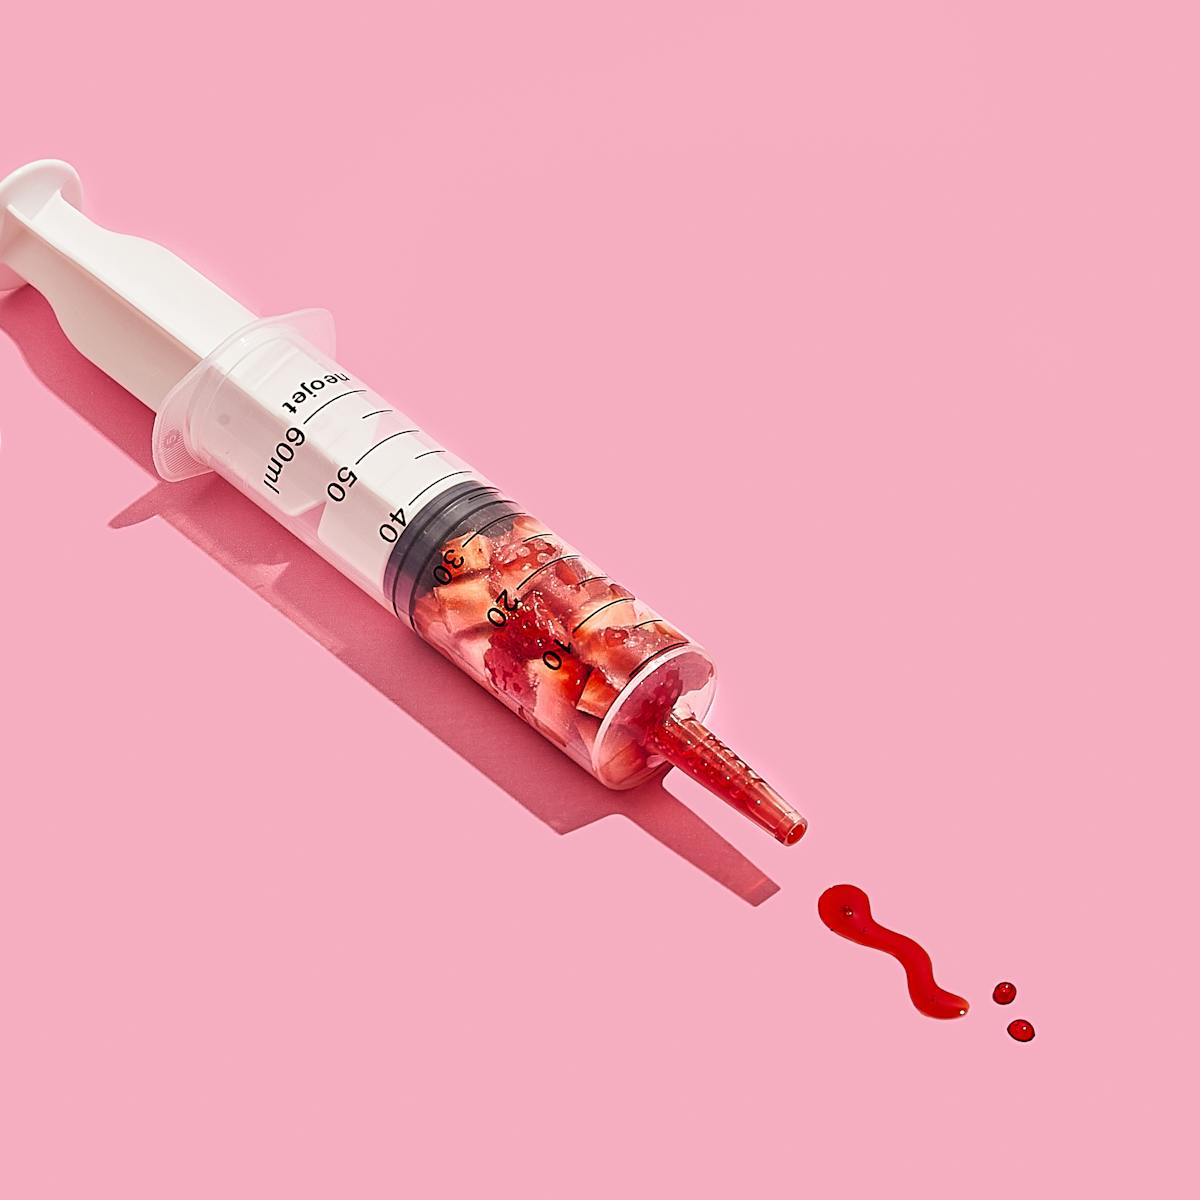 Photograph of a medical syringe lying on its side on a bright pink background. The syringe is full of chunks of cut up strawberry, compressed down into the lower half of the graduated tube. The nozzle of the syringe contains bright red strawberry juice. Some of this juice has been pushed out of the syringe and formed two dots and a squiggle on the background, reminiscent of marks made with a pen on paper. At the plunger end of the syringe are 2 strawberries lying on their side on the background.